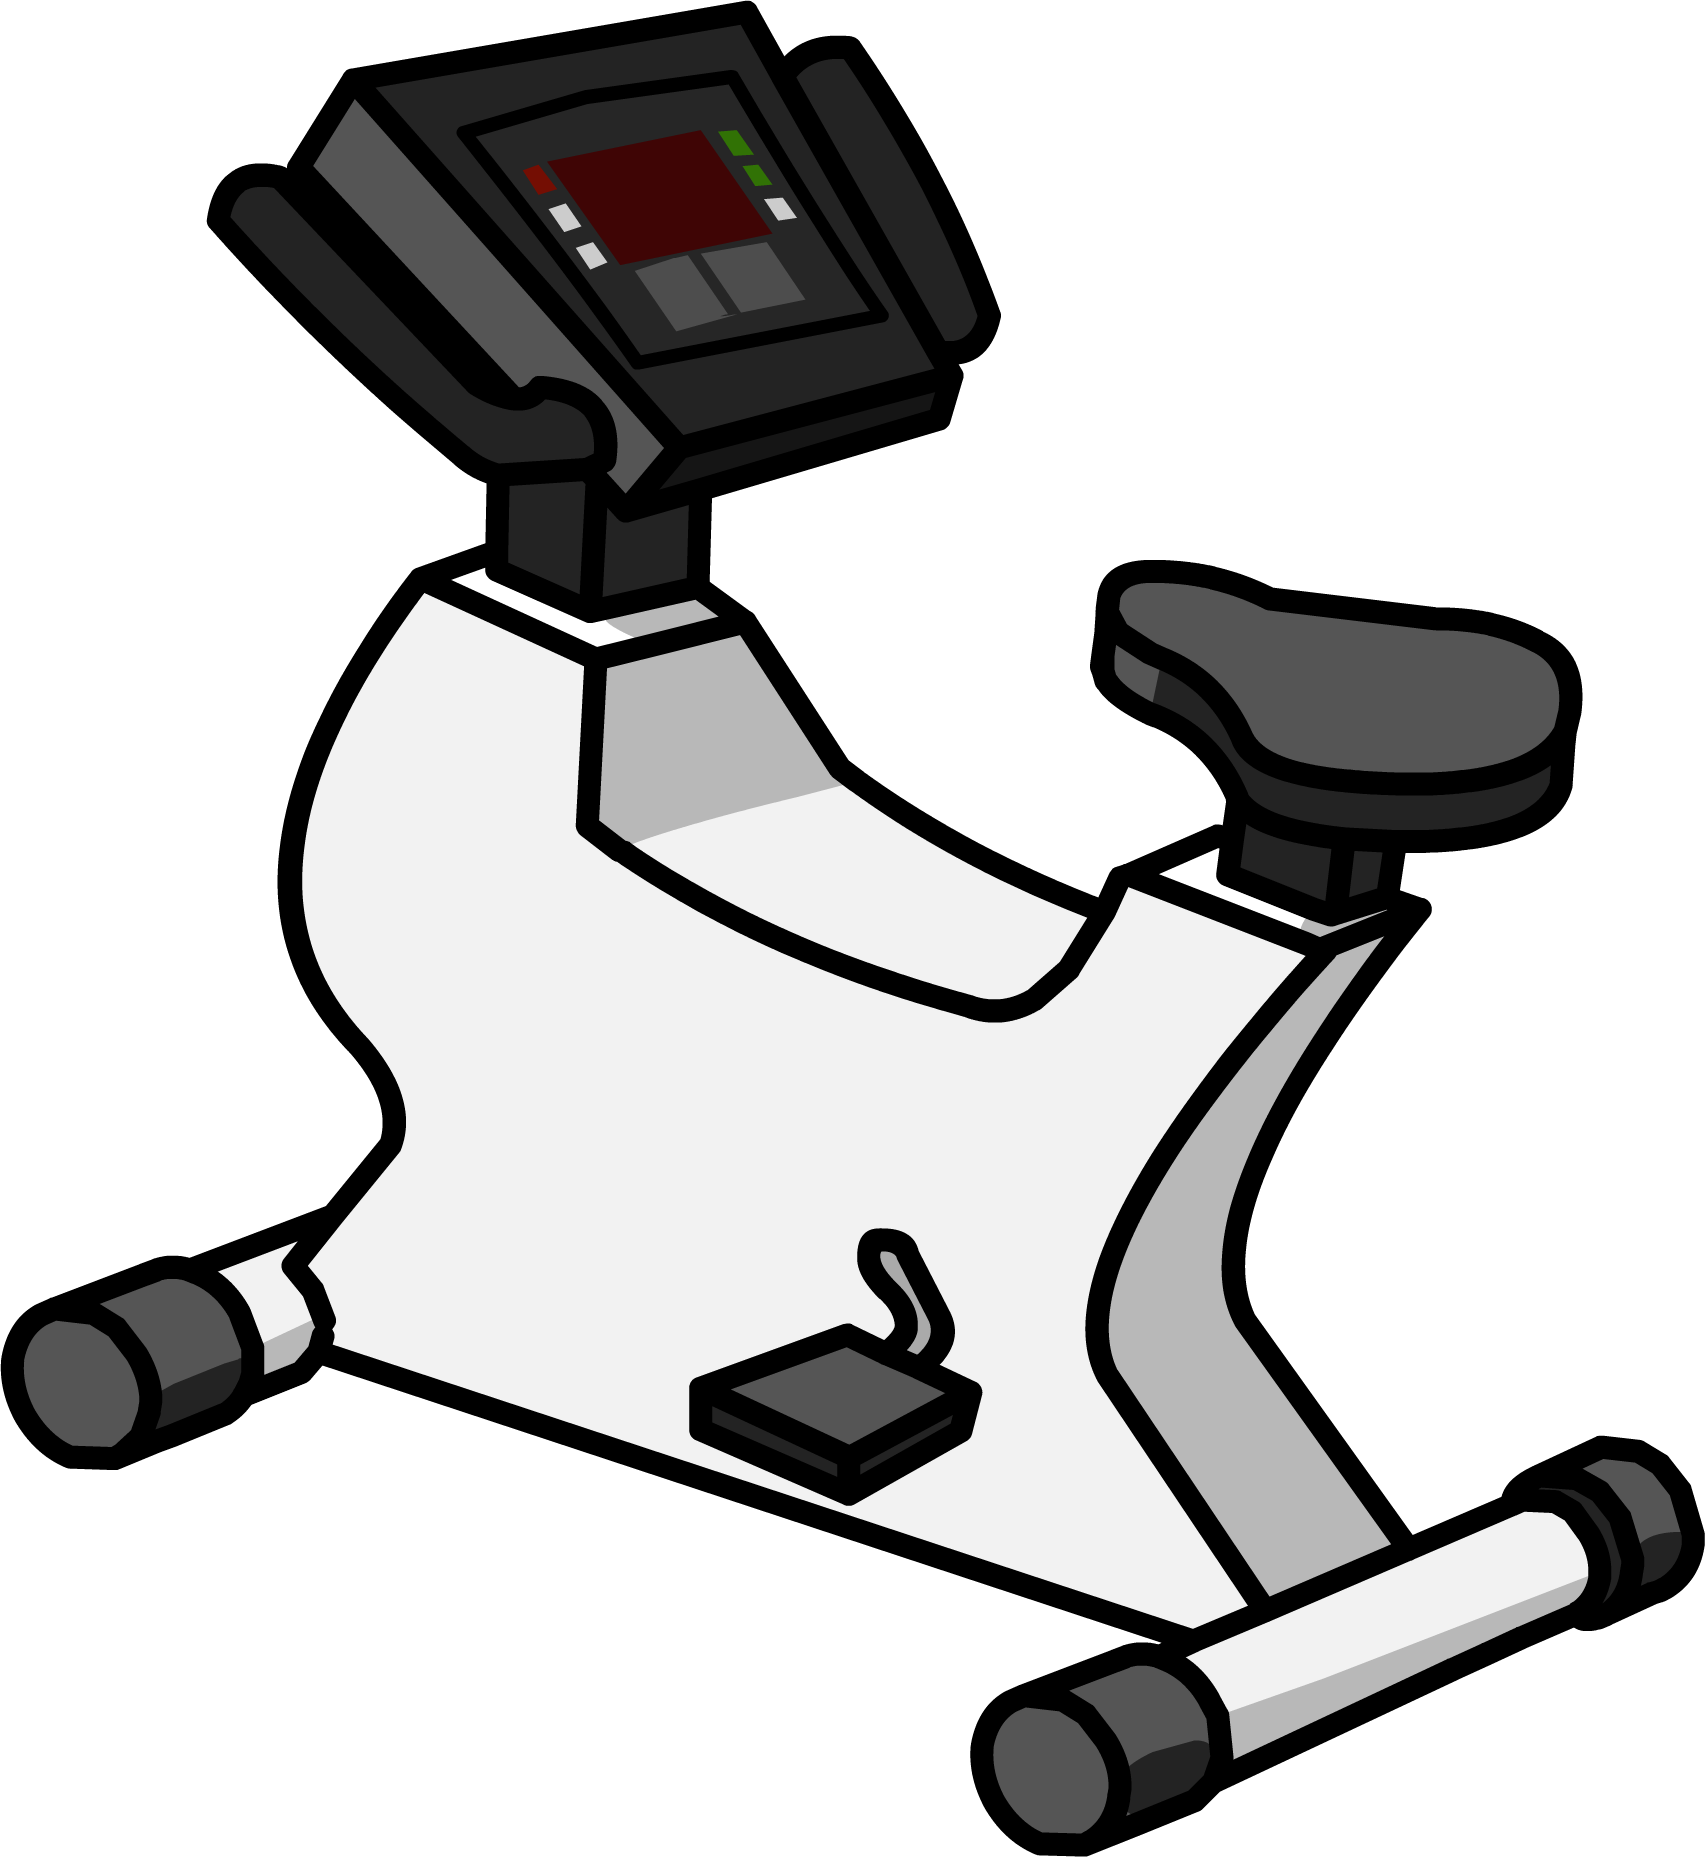 Exercise Bike Png - Image   Exercise Bike.png | Club Penguin Wiki | Fandom Powered By Wikia, Transparent background PNG HD thumbnail